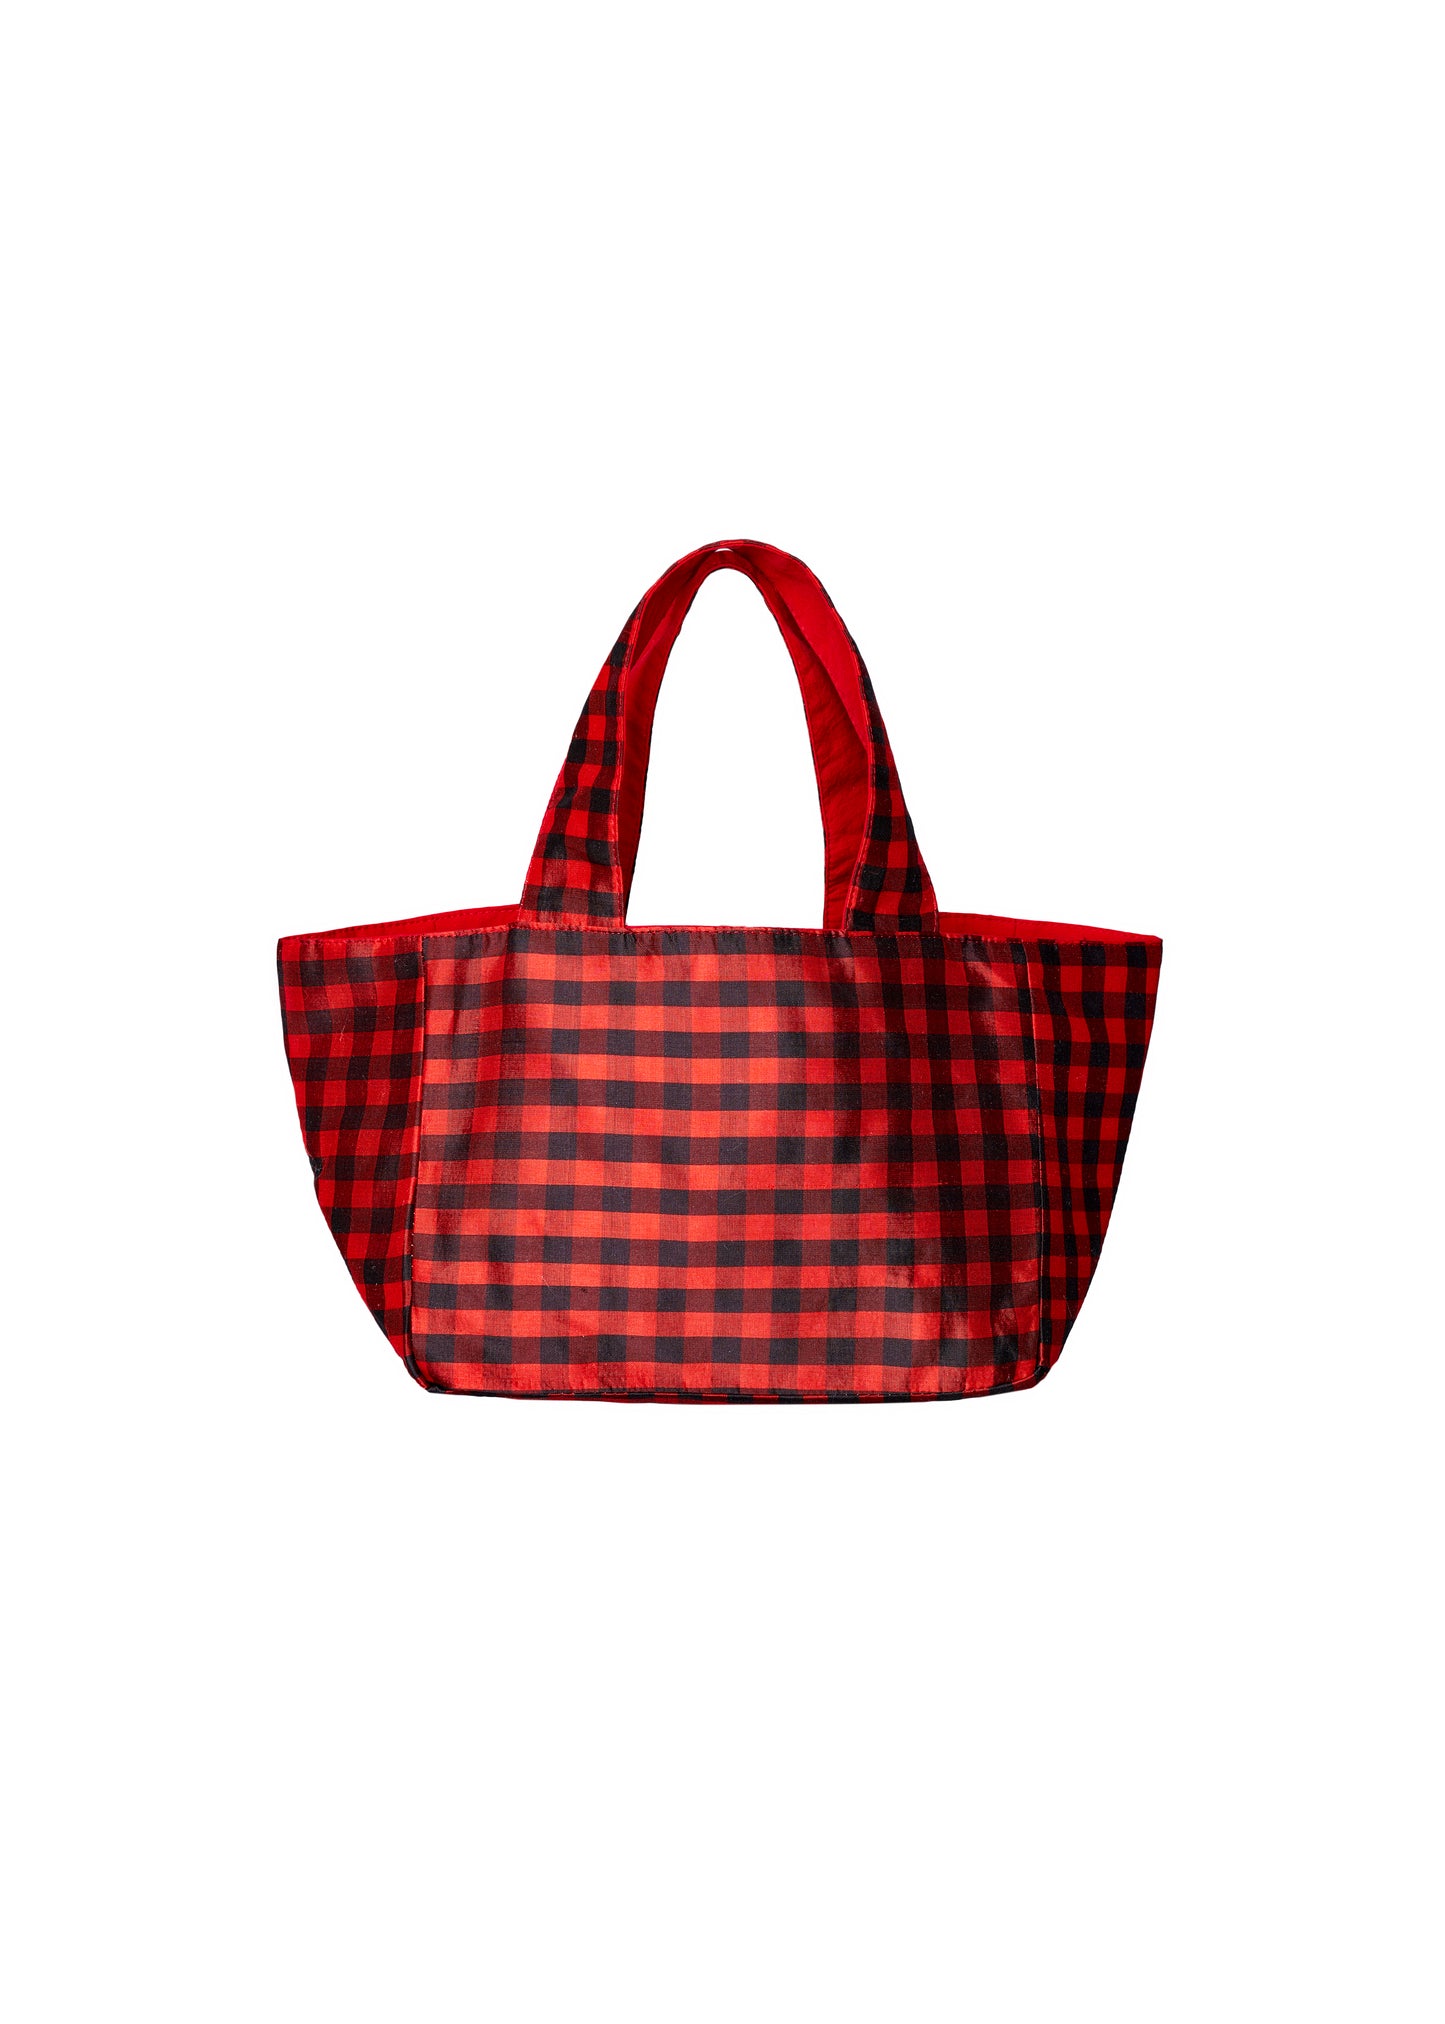 REVERSIBLE GINGHAM RED BROWN / RED MINI TOTE